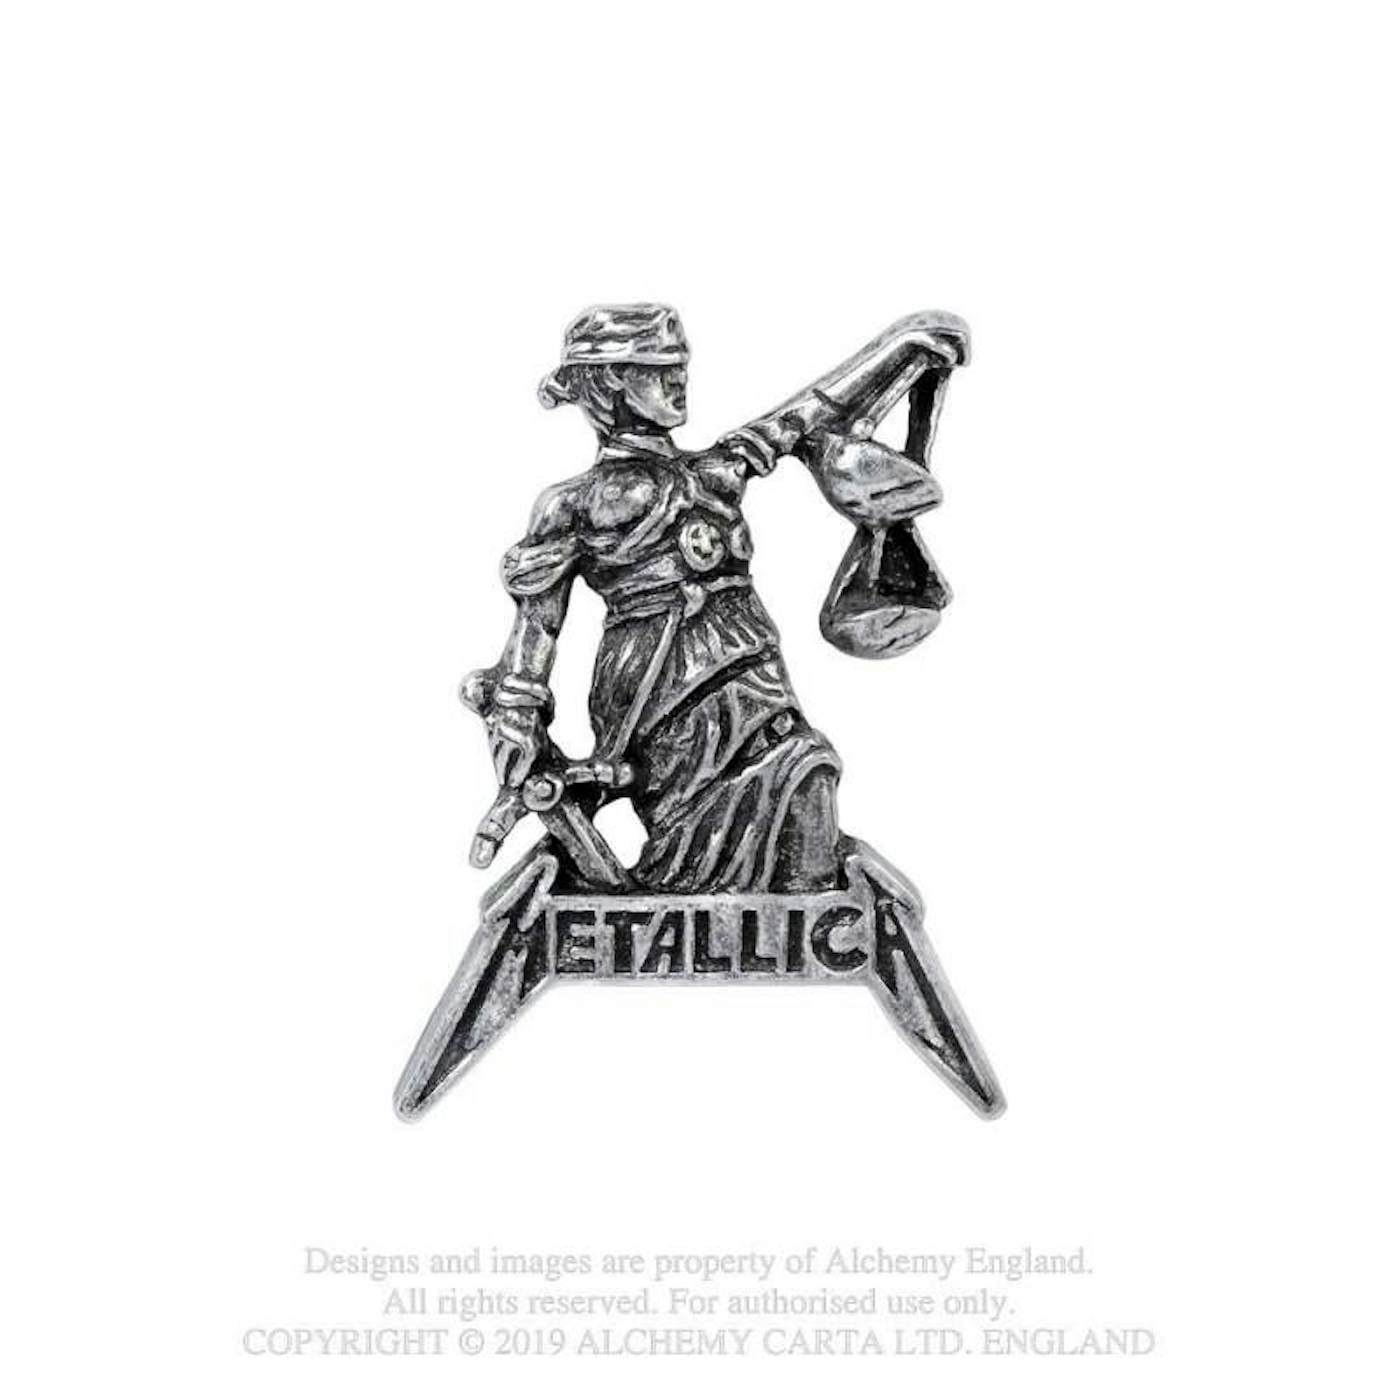  Metallica Pin Badge - Justice For All